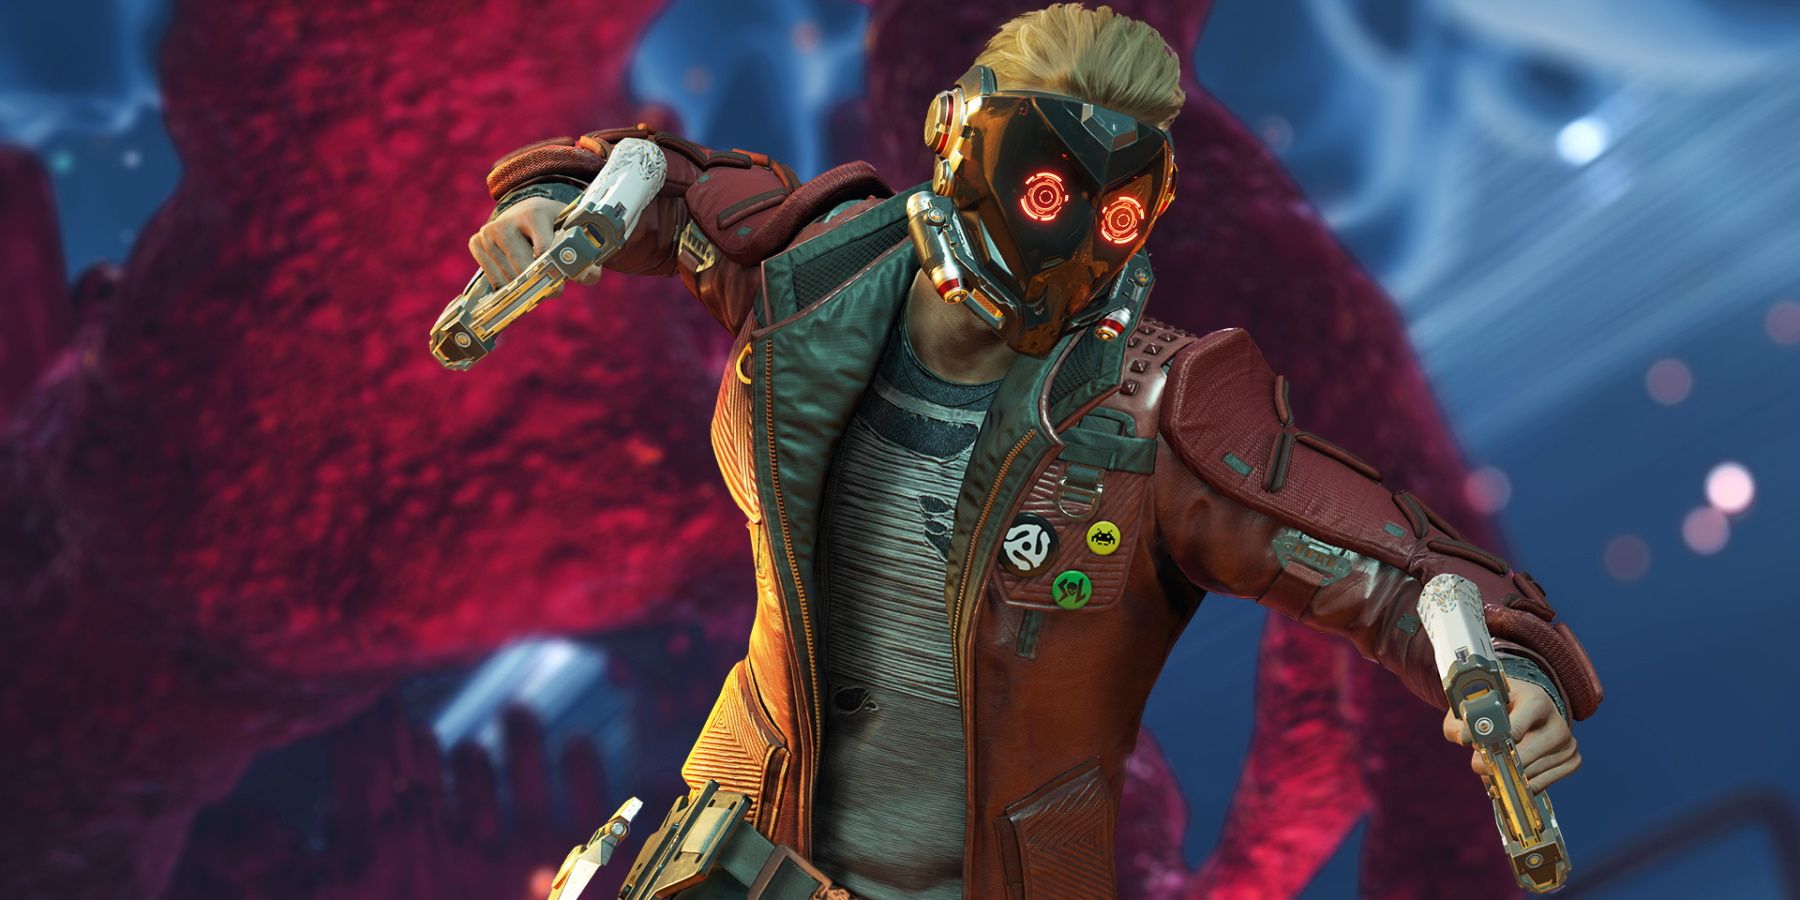 Marvel’s Guardians of the Galaxy star-lord peter quill